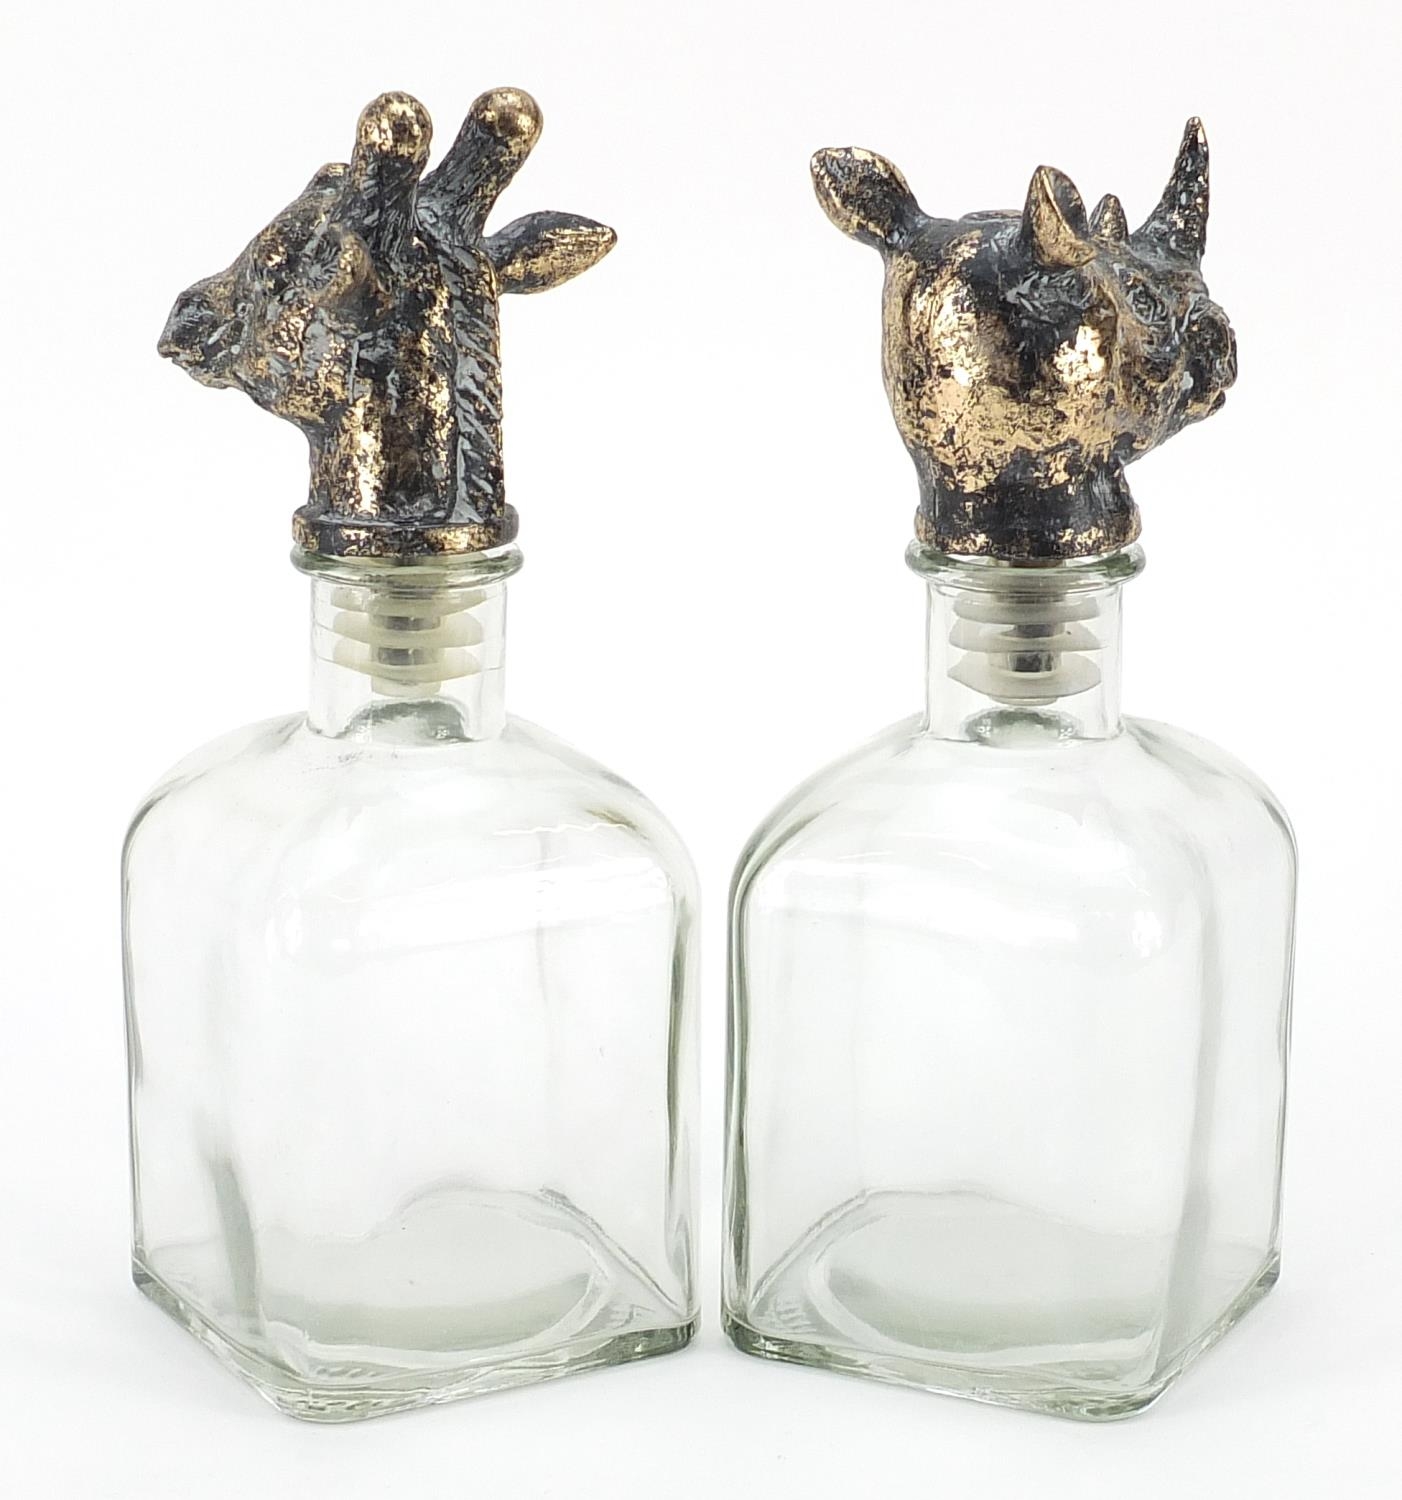 Pair of glass decanters with bronzed rhinoceros and giraffe head stoppers, the largest 24.5cm high - Image 2 of 3